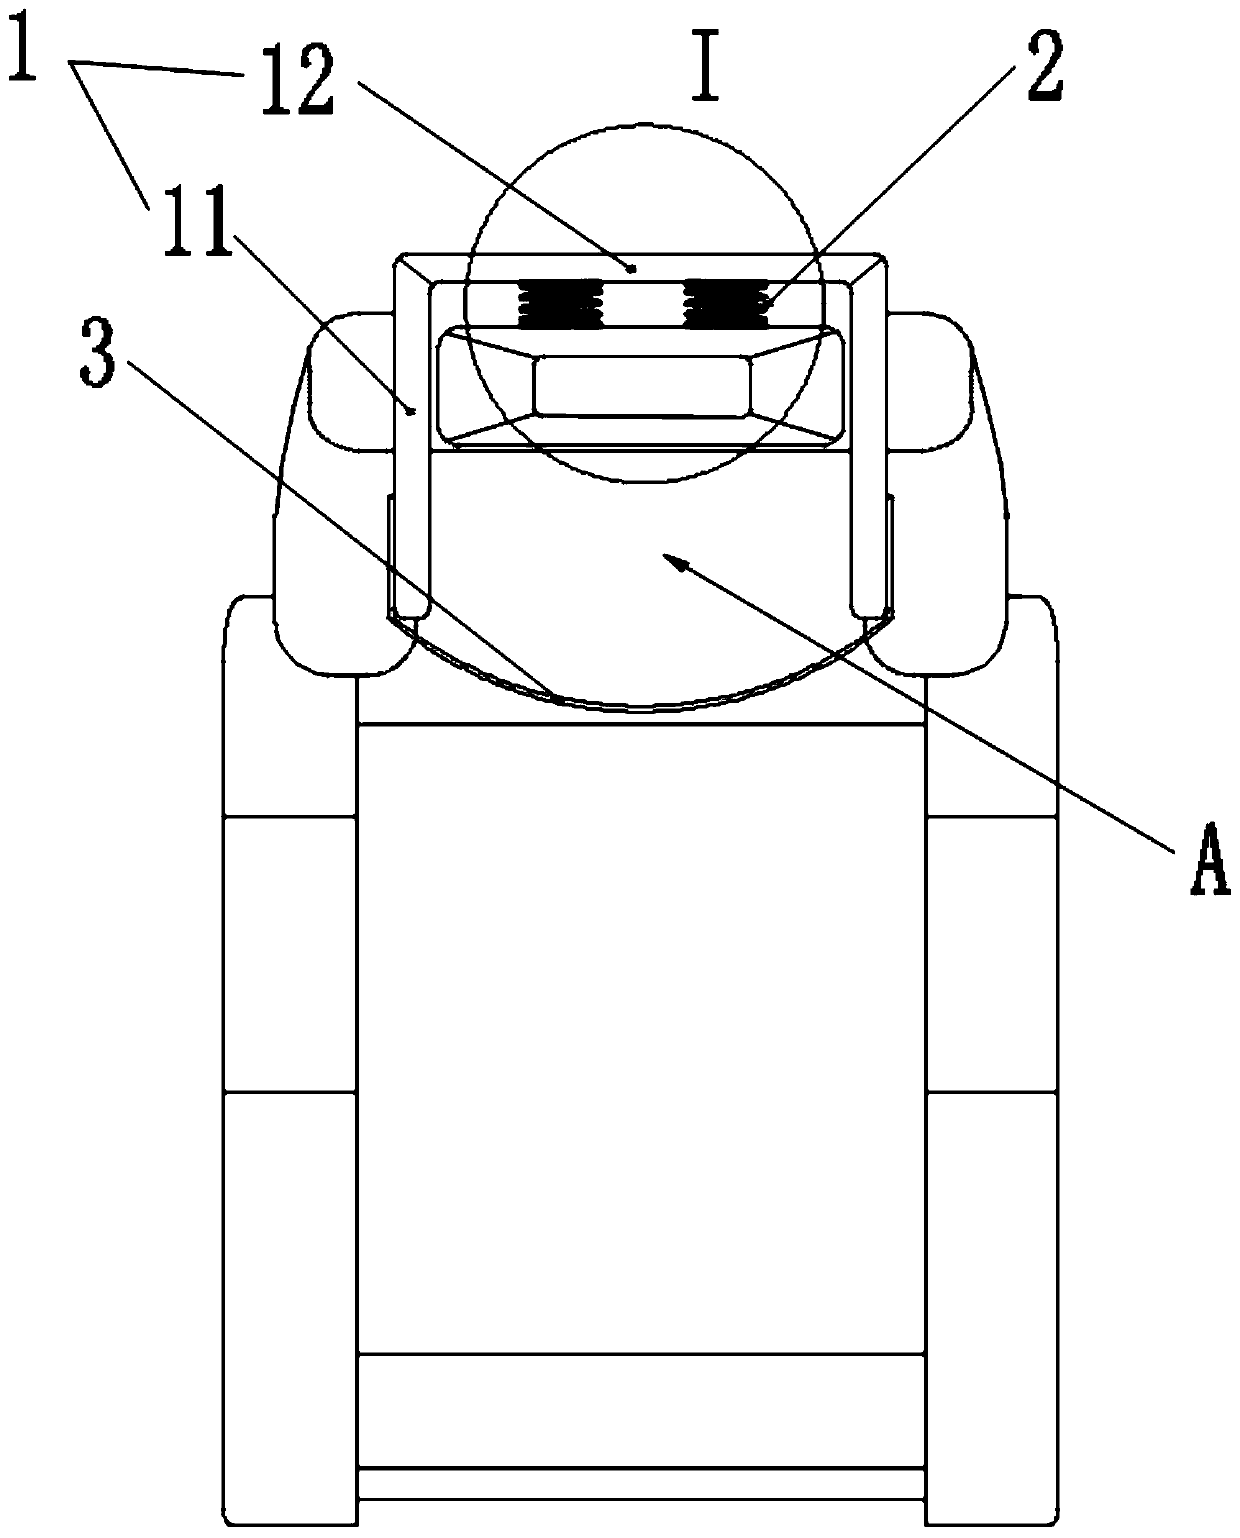 Head protection device mounted on automobile seat headrest and automobile seat